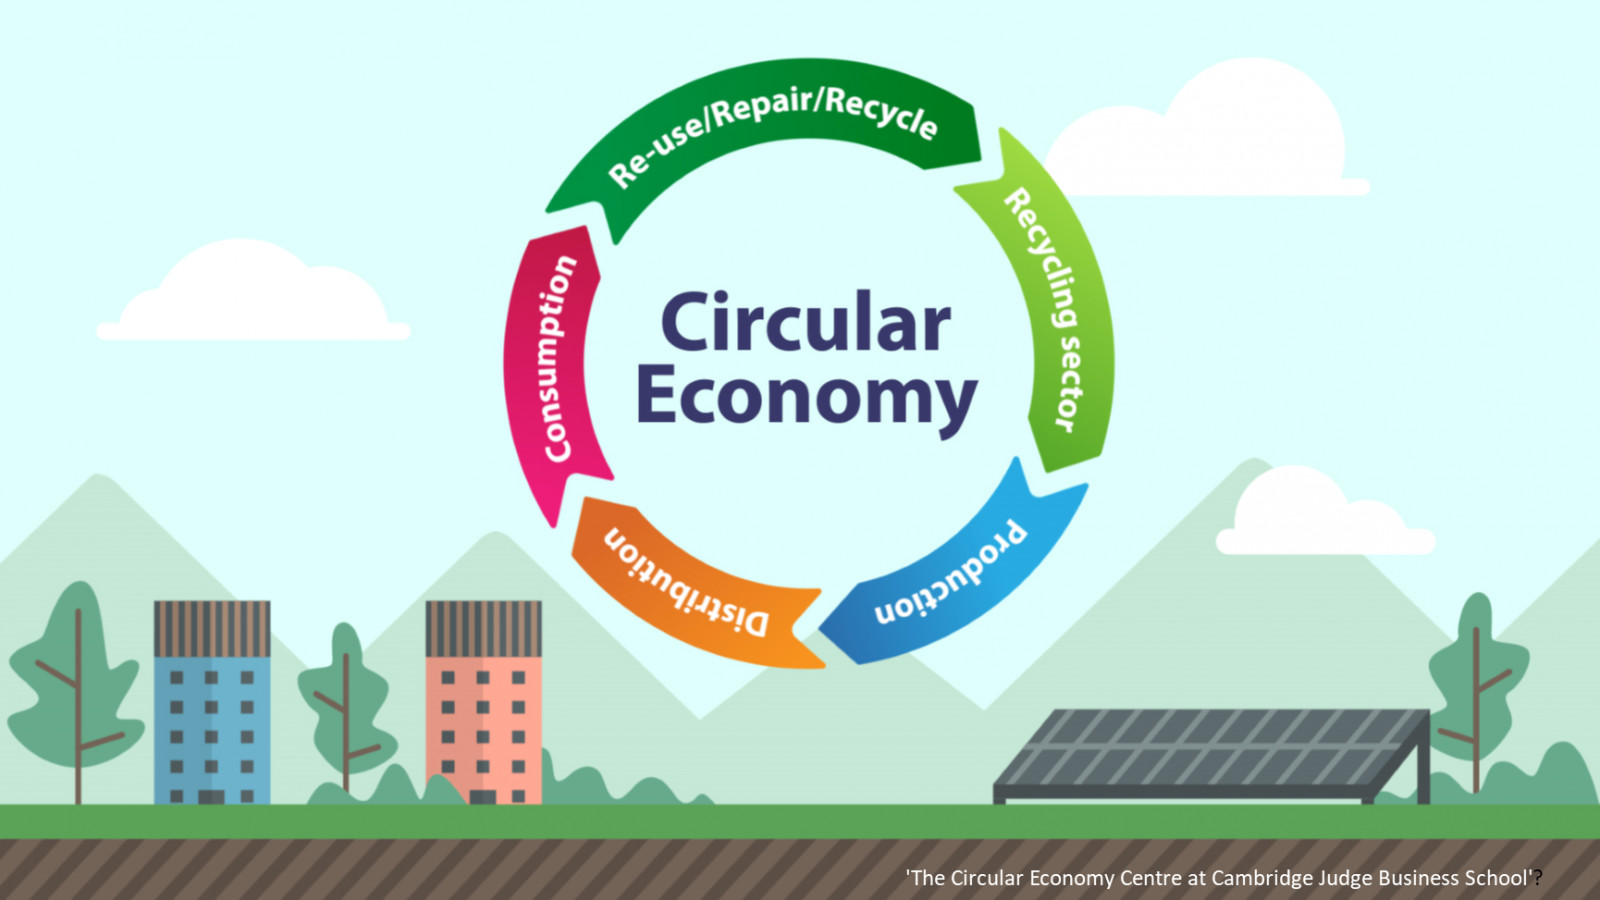 Five phase Circular Economy graphic from Cambridge Judge Business School